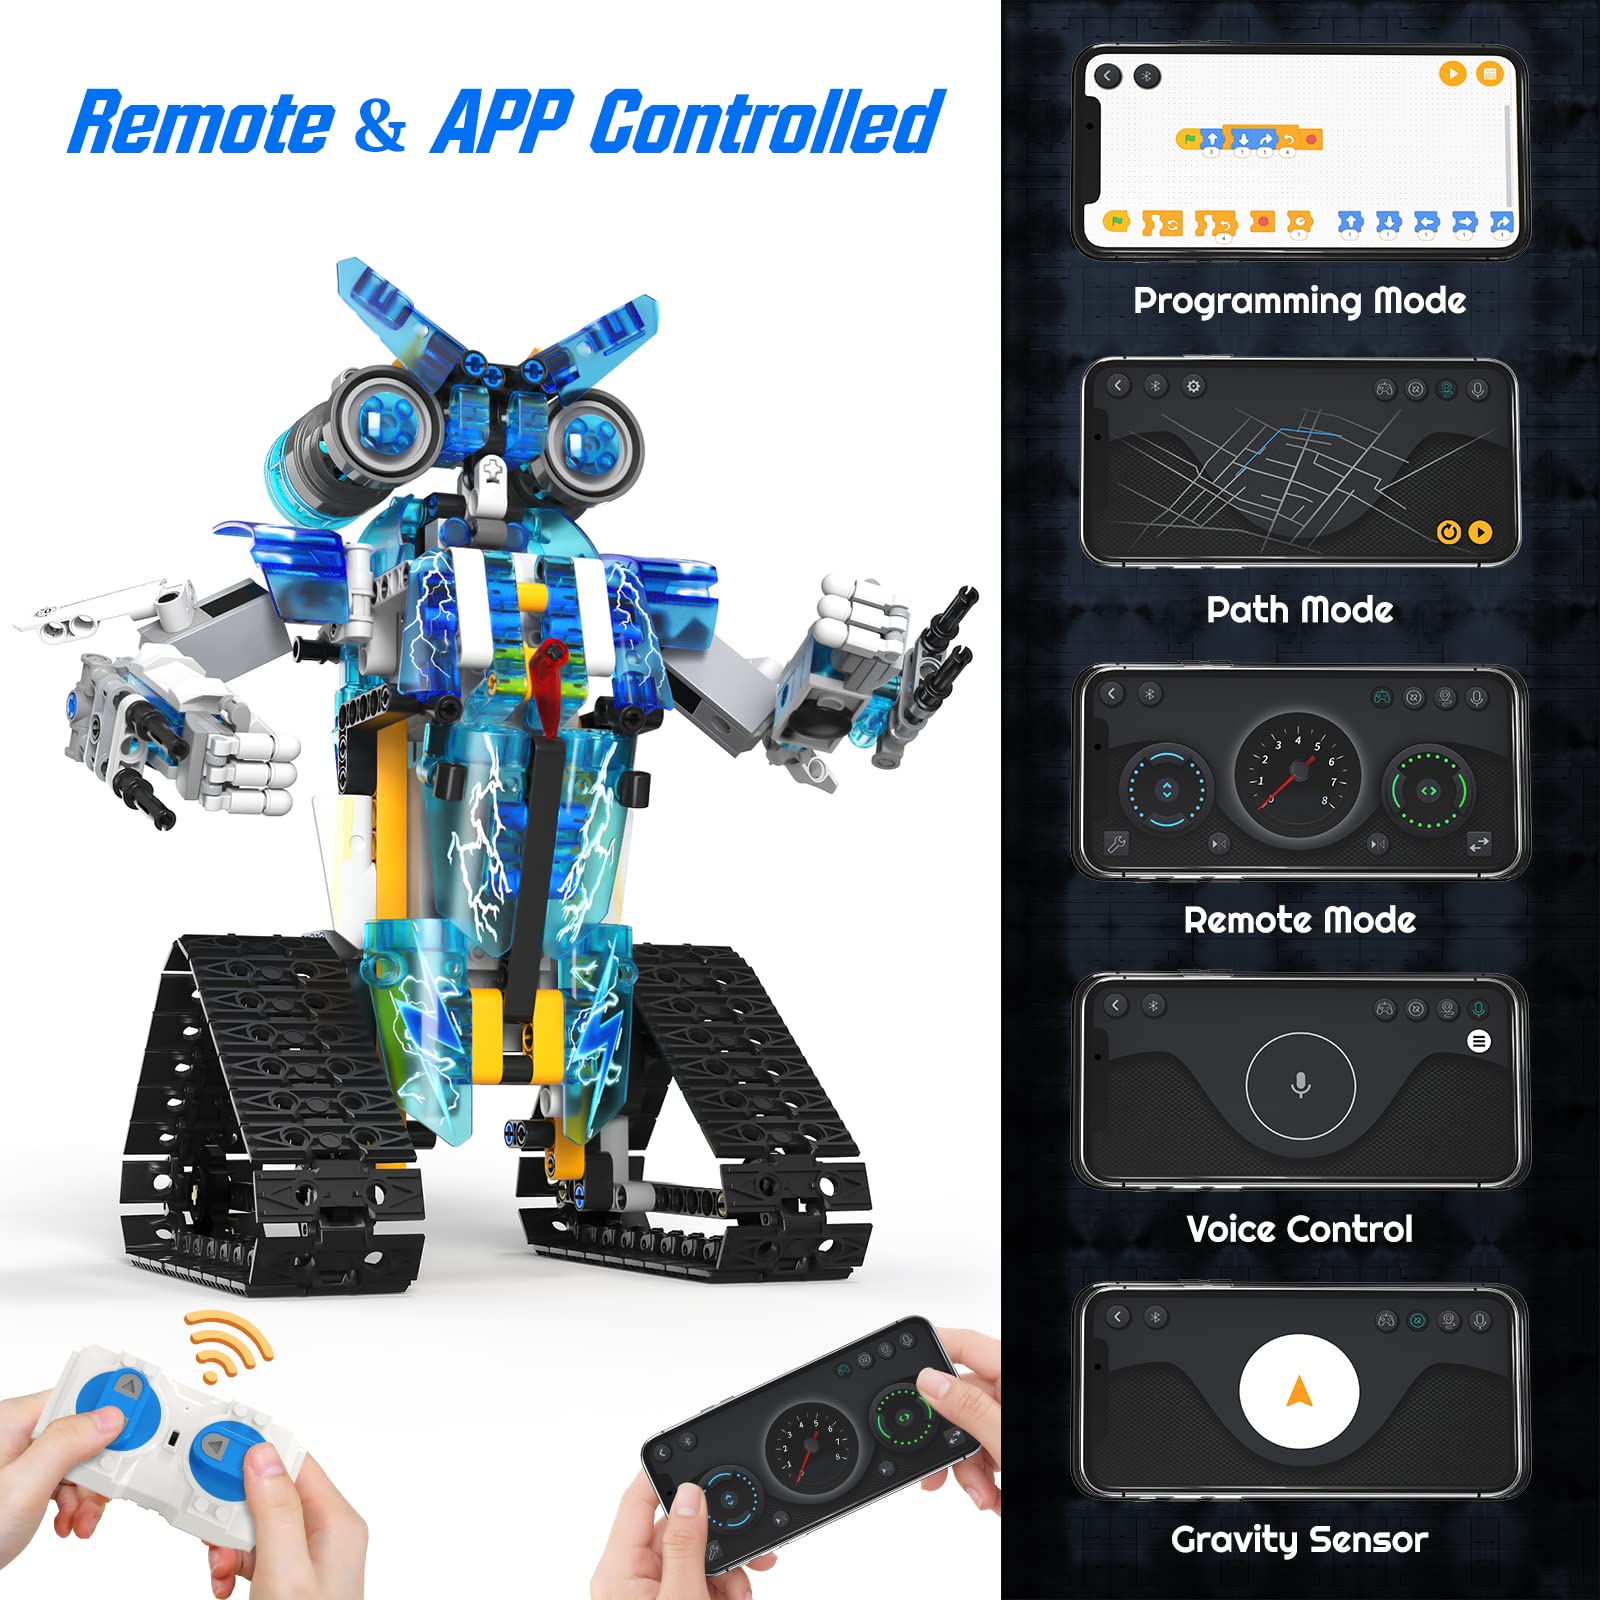 HAKPNEW Remote Control Building Blocks,Programmable Building Robotics Kit with APP Kids Robot Toys for Boys 6-12 Years Old